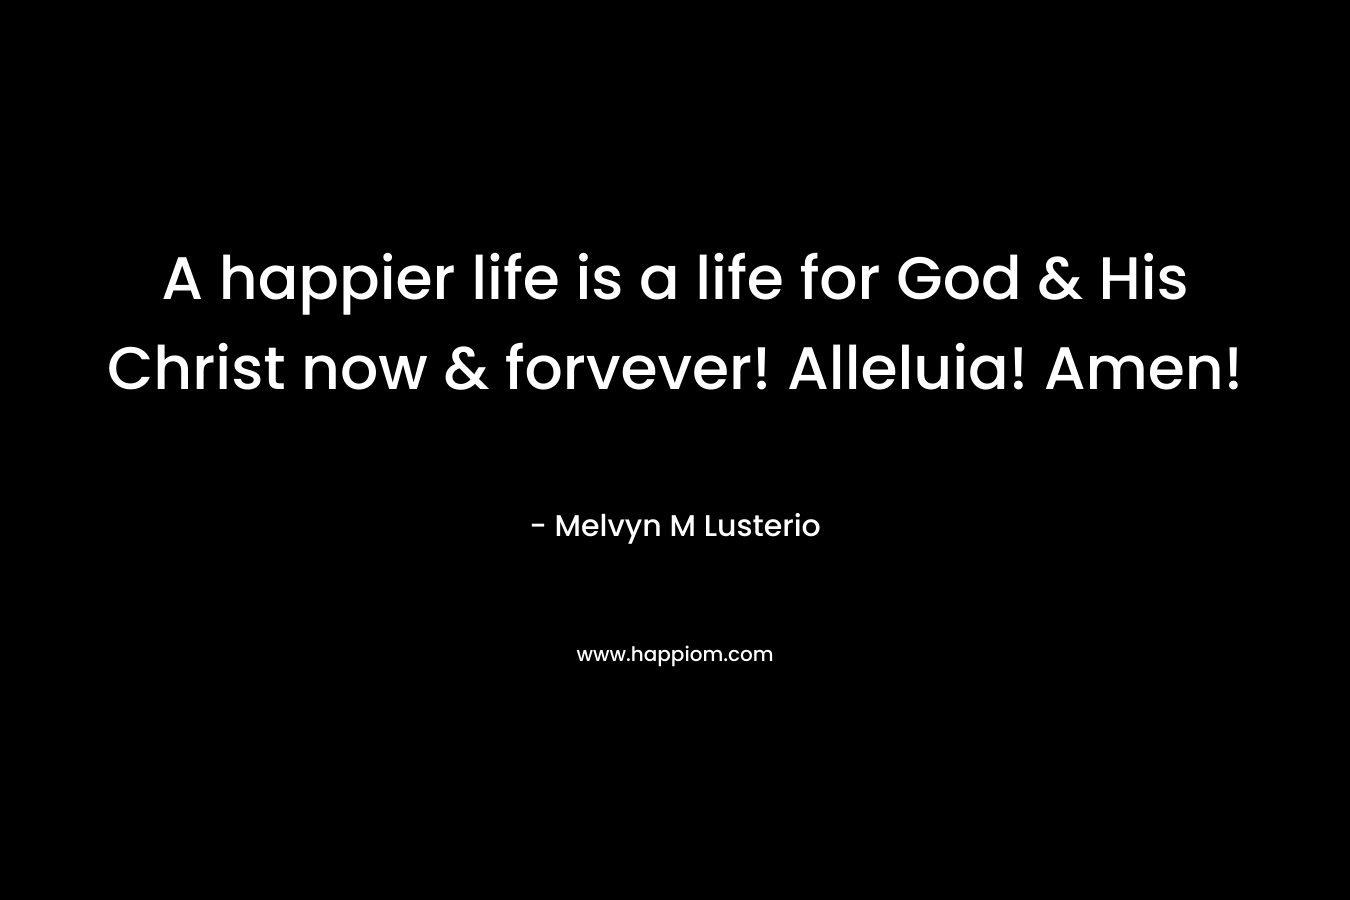 A happier life is a life for God & His Christ now & forvever! Alleluia! Amen! – Melvyn M Lusterio